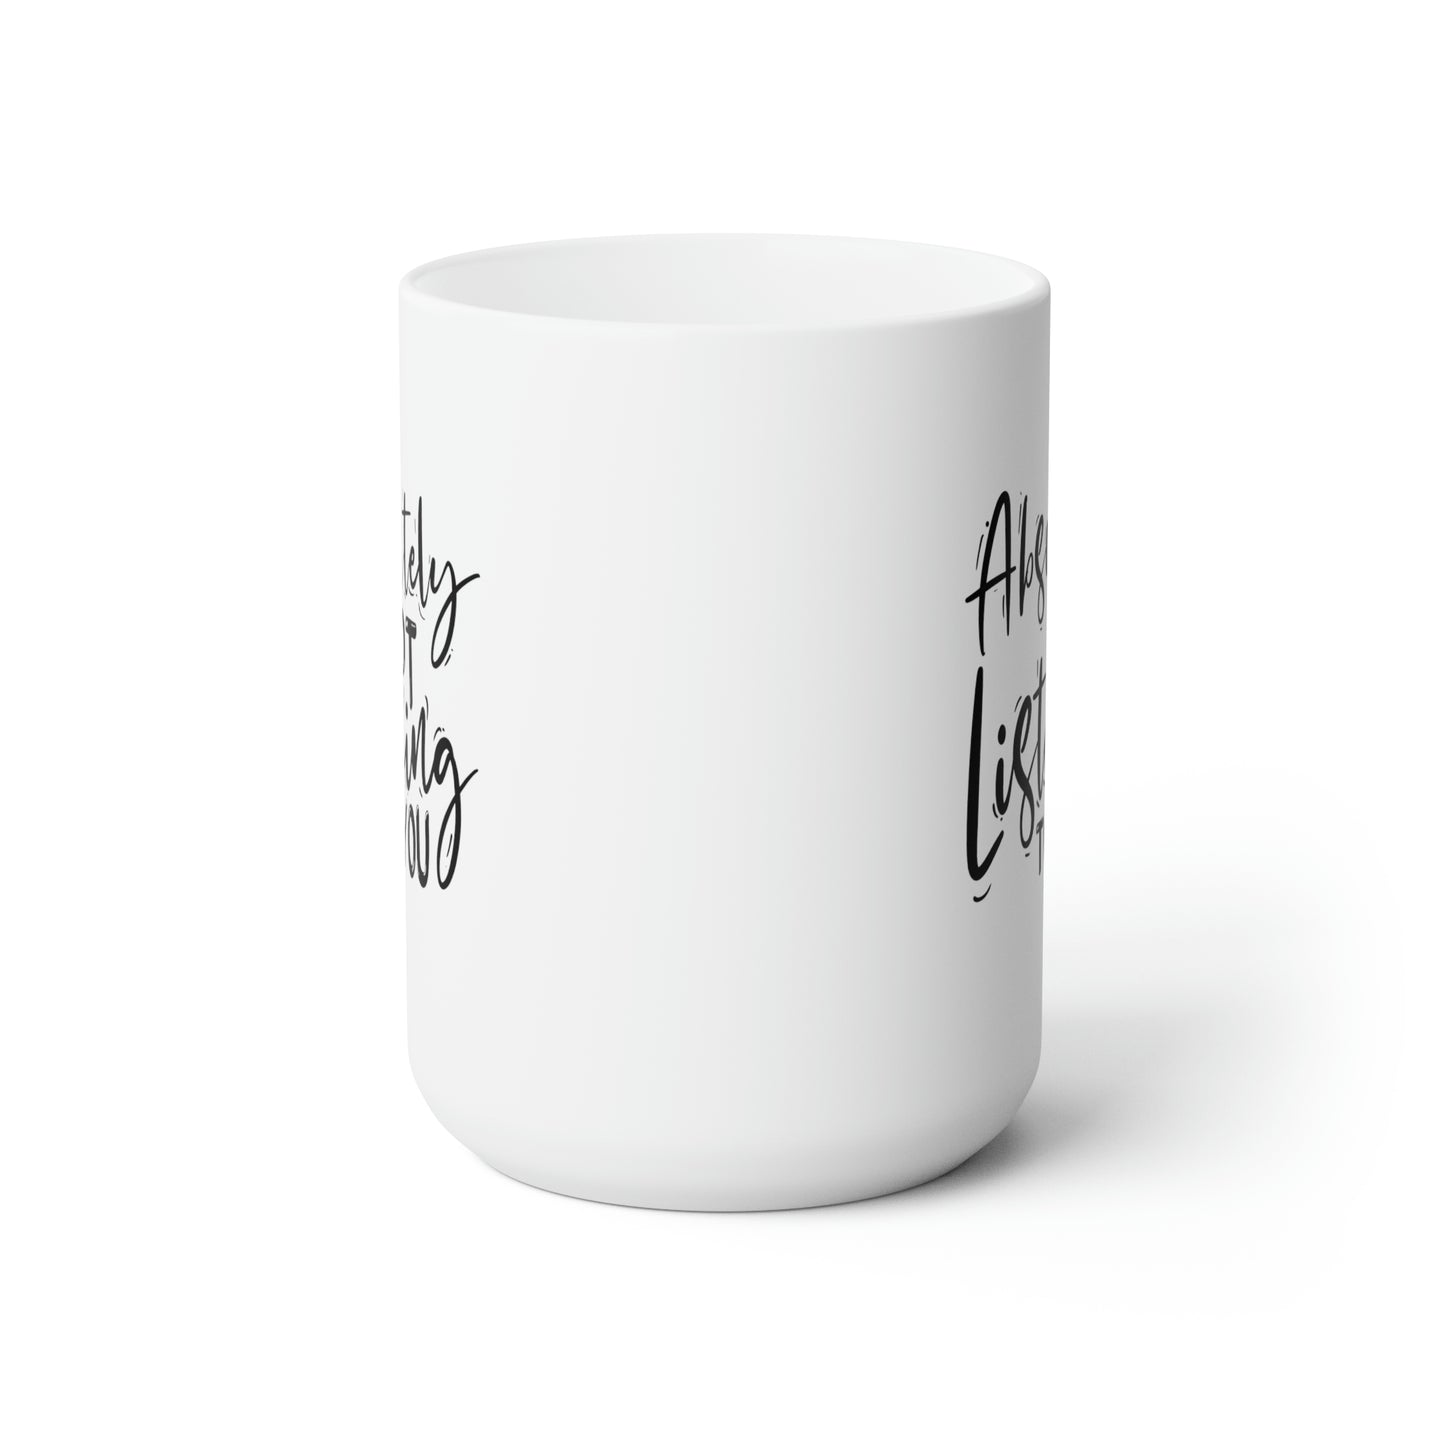 Absolutely Not Listening To You - Funny Coffee Mug